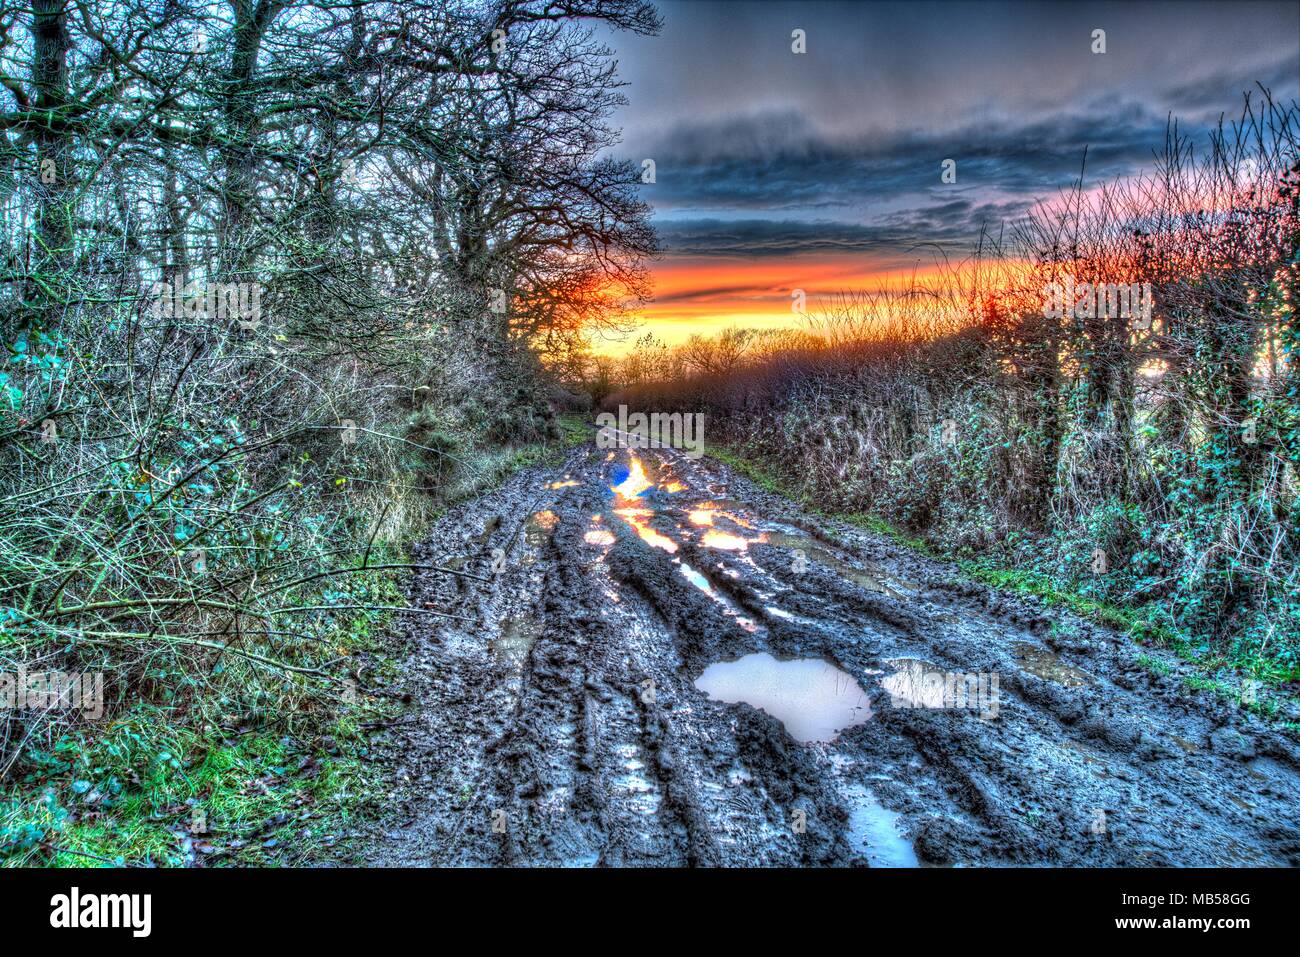 Village of Coddington, England. Artistic sunset view over a bridleway in rural Cheshire. Stock Photo